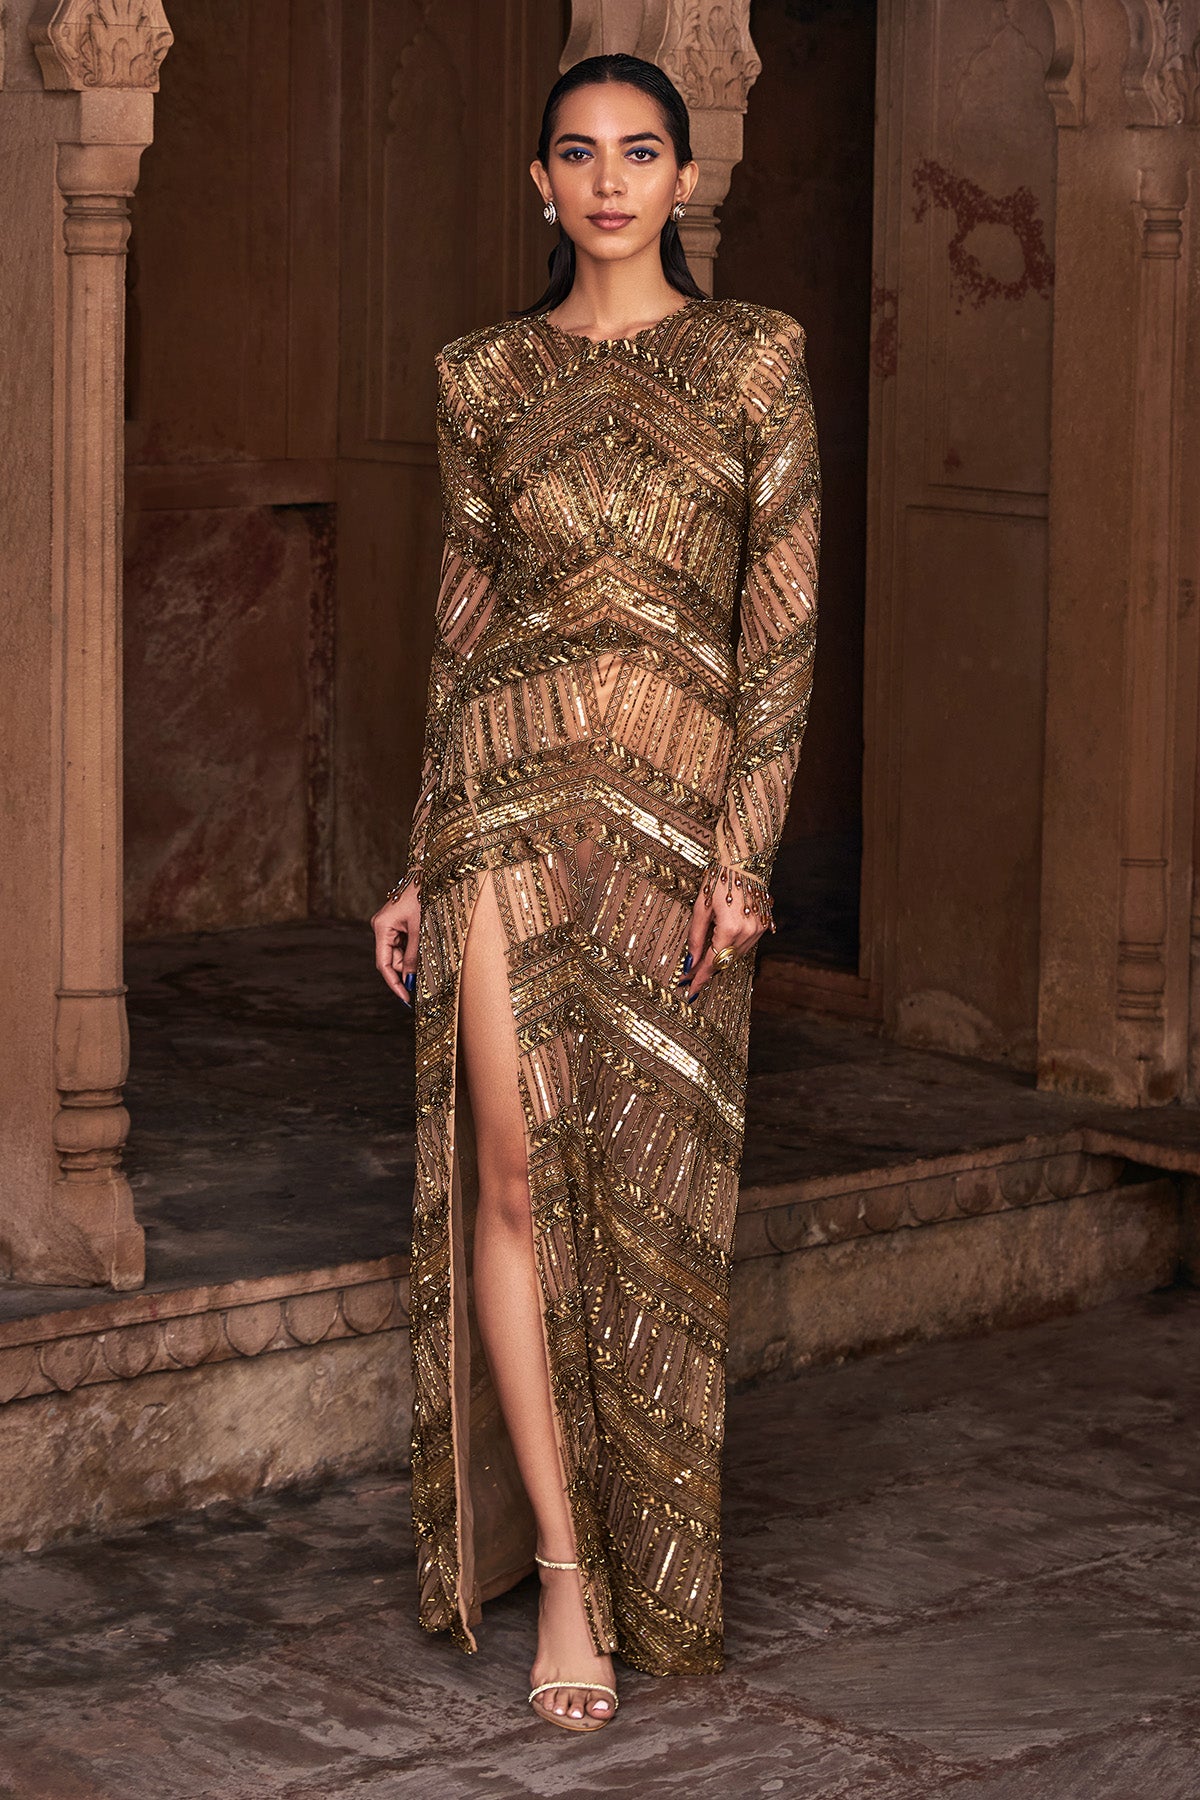 MATELLIC GOLD EMBROIDERED GOWN